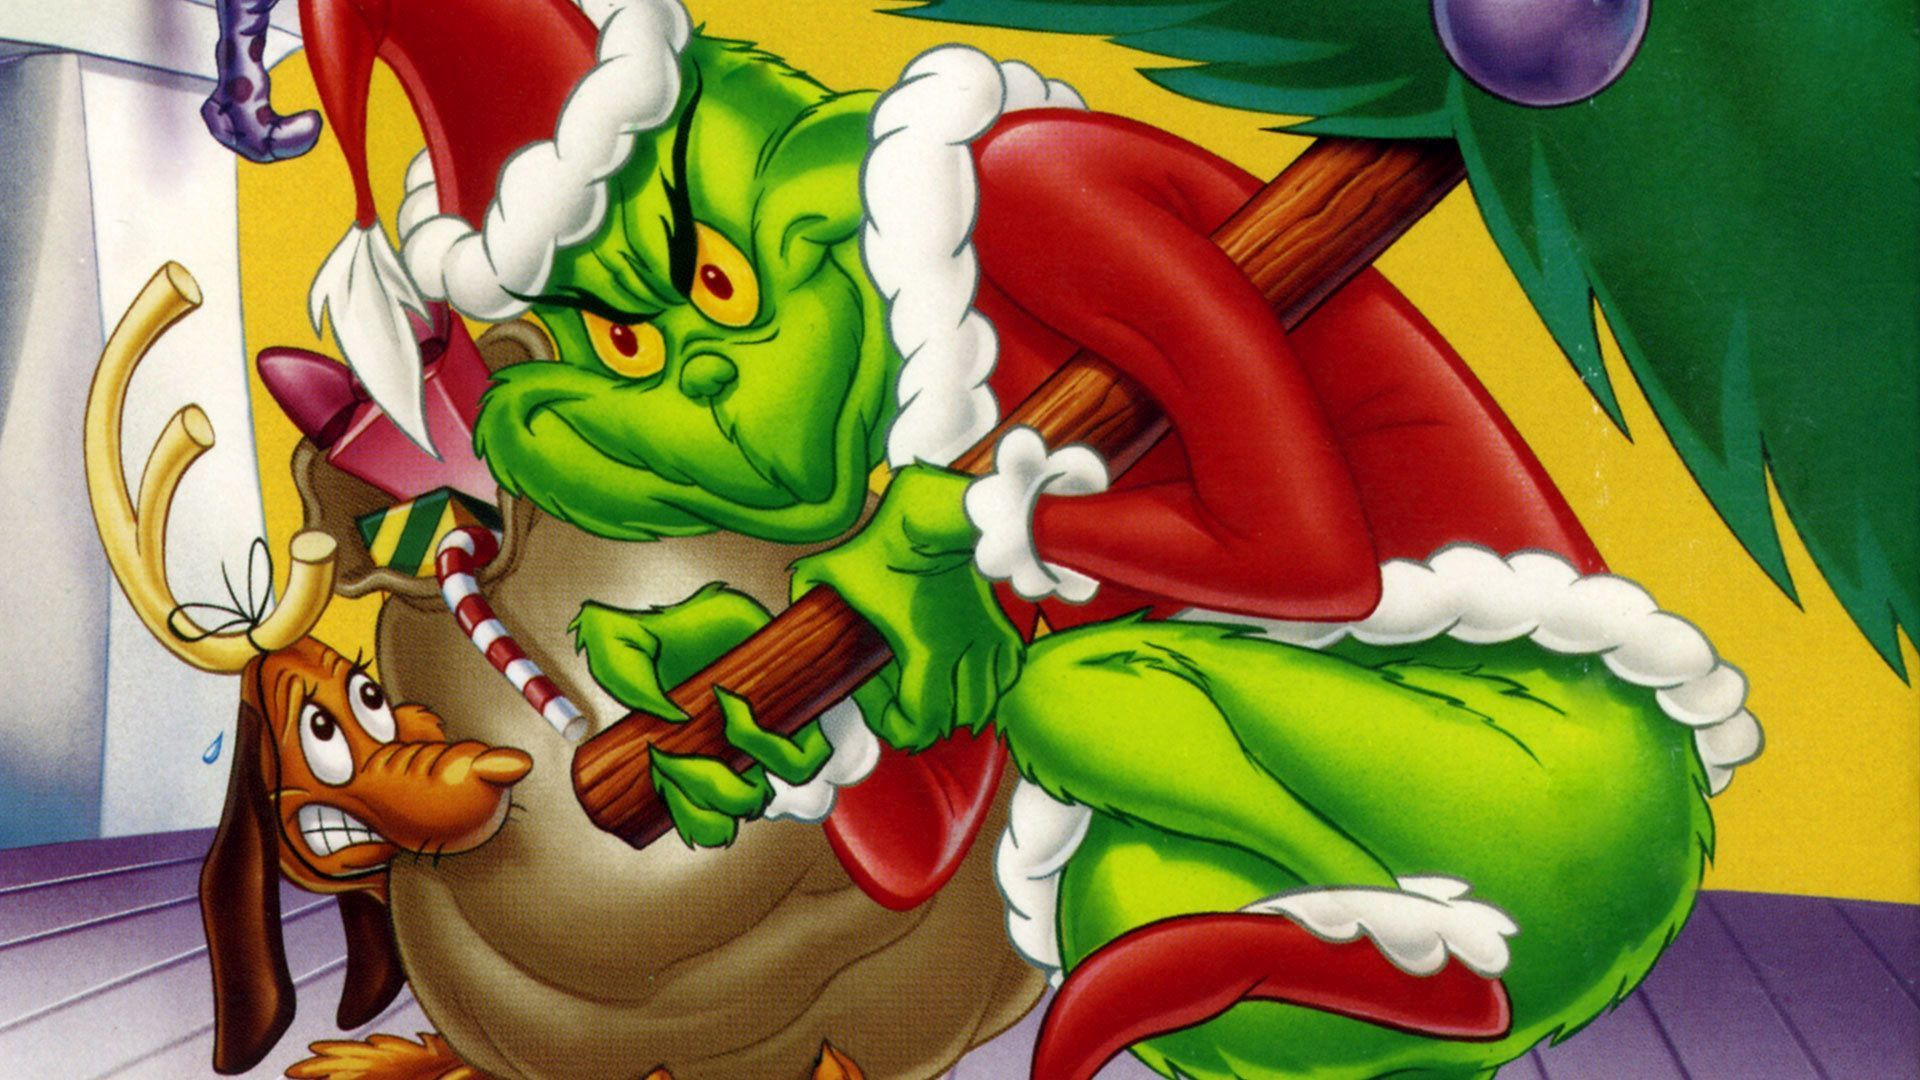 Download How The Grinch Stole Christmas wallpapers for mobile phone free  How The Grinch Stole Christmas HD pictures